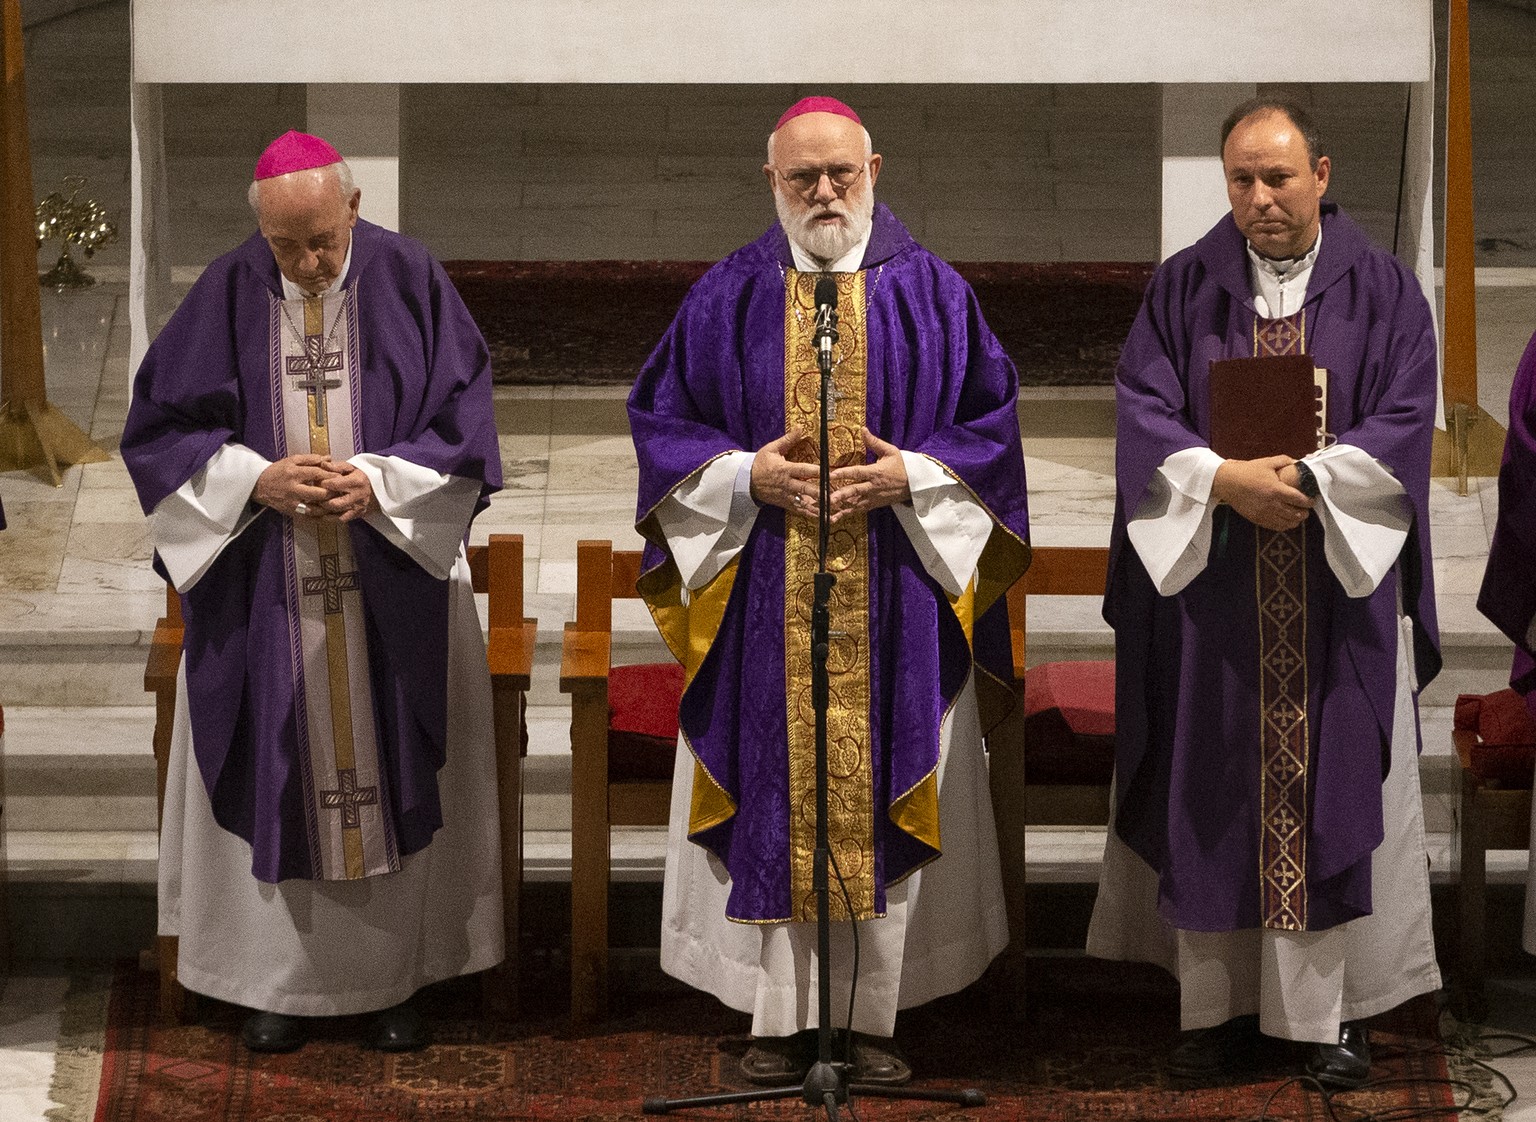 In this March 28, 2019 photo, Bishop Carlos Eugenio Irarrázabal, right, takes part in a Mass with acting archbishop of Santiago, Monsignor Celestino Aos, center, at El Bosque Parish in Santiago, Chile ...